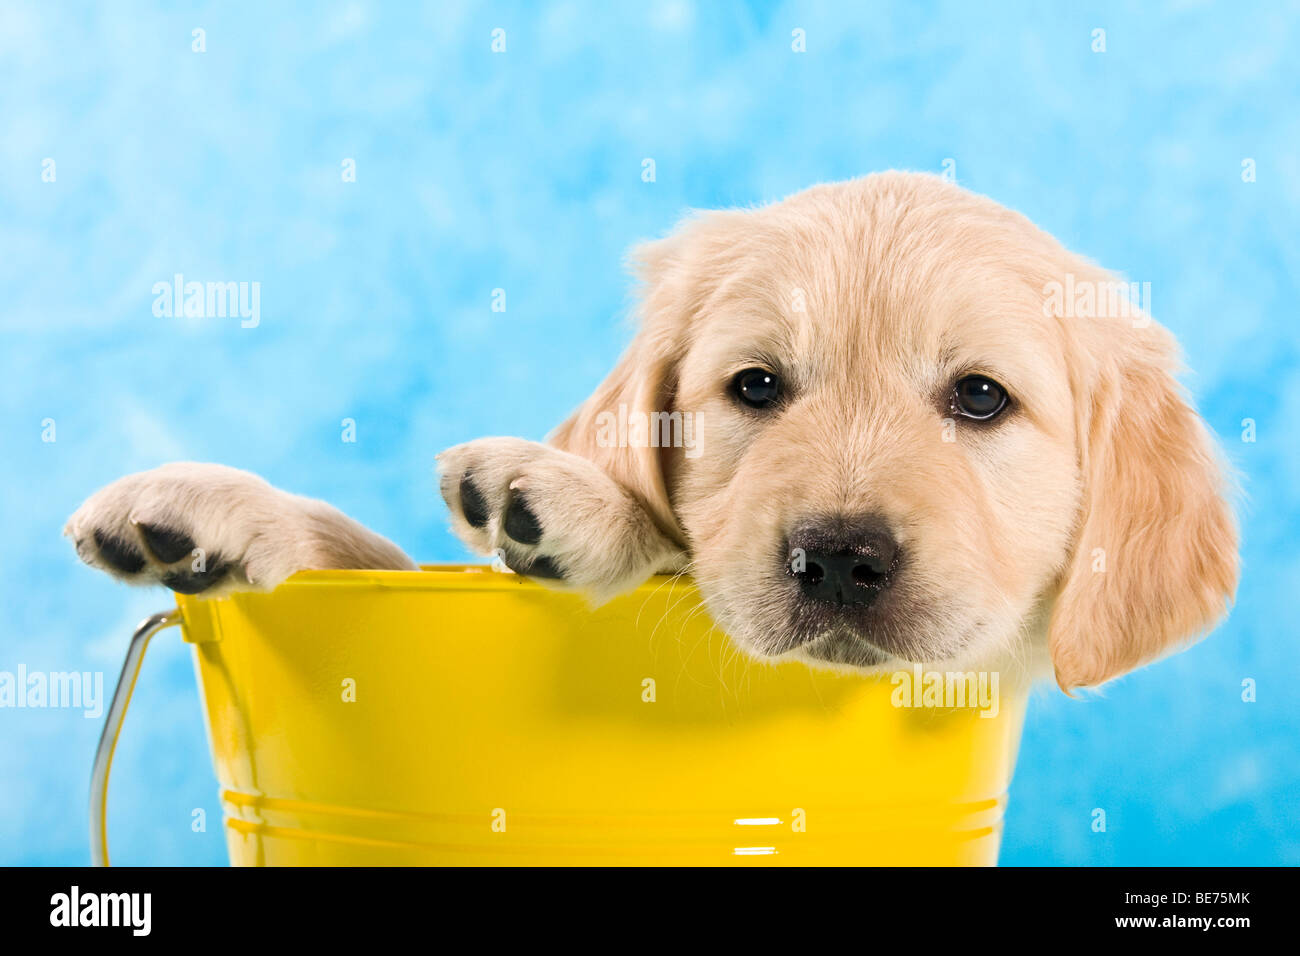 Im Eimer High Resolution Stock Photography and Images - Alamy